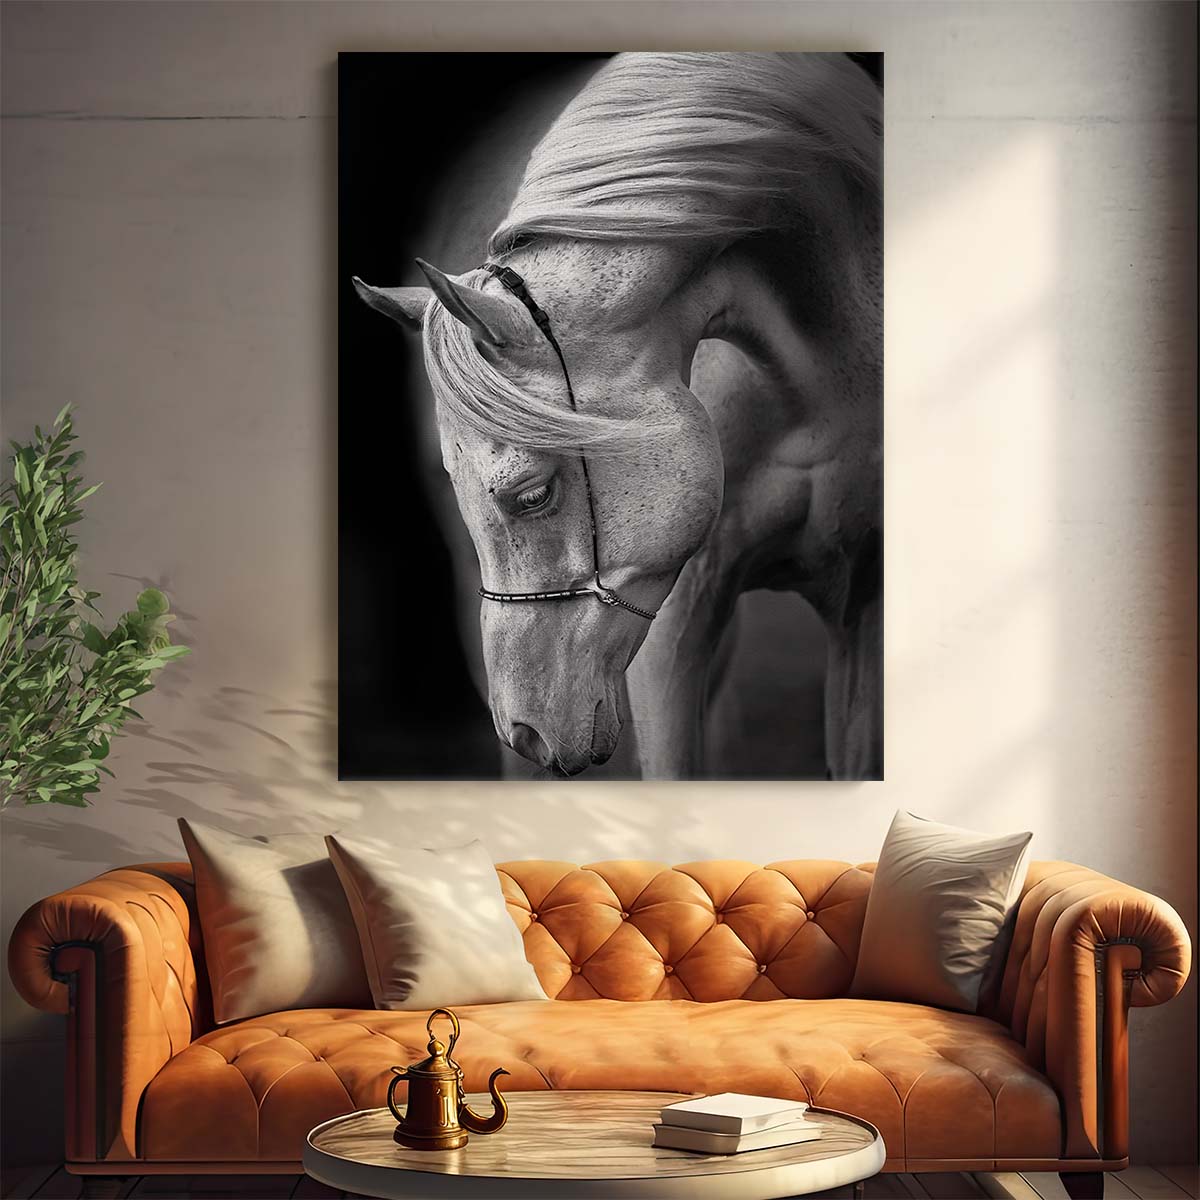 Arabian Stallion Horse Portrait, Equestrian Photography Art by Luxuriance Designs, made in USA